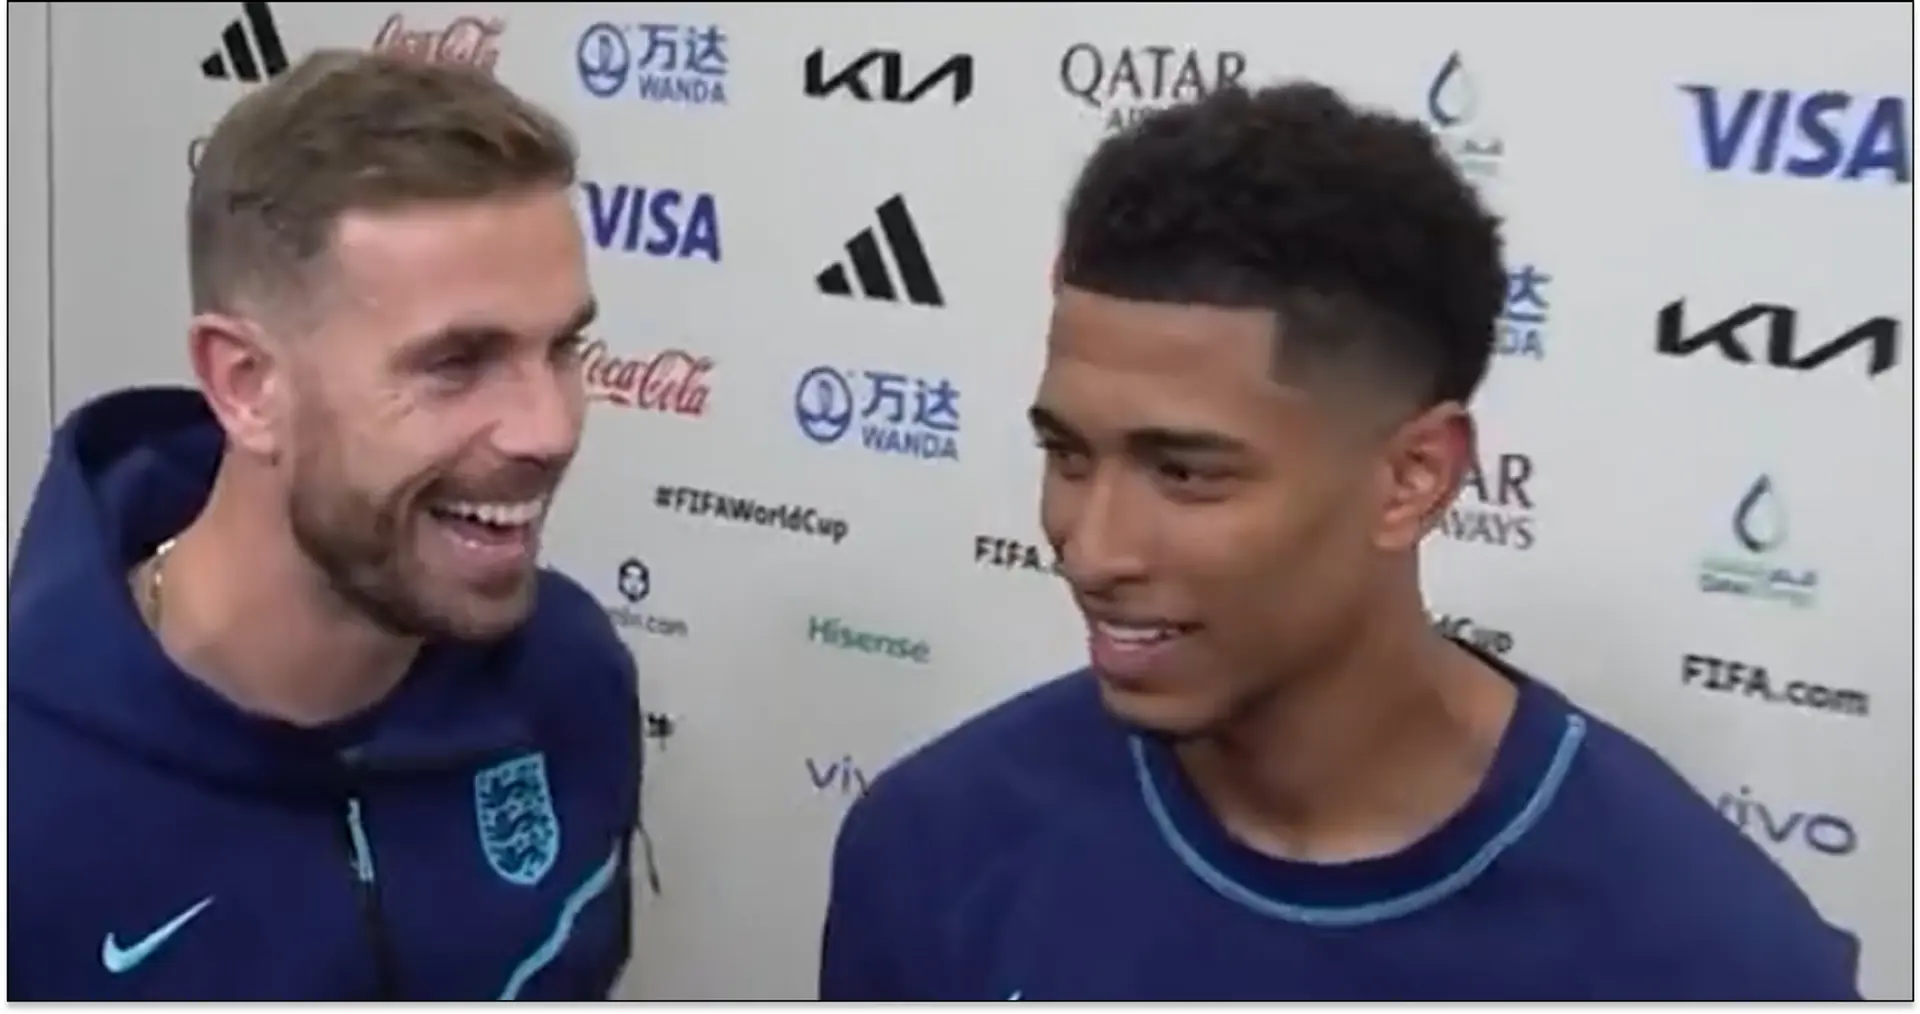 Journalist asks if Bellingham will join Liverpool, Jude and Hendo hilariously react (video)